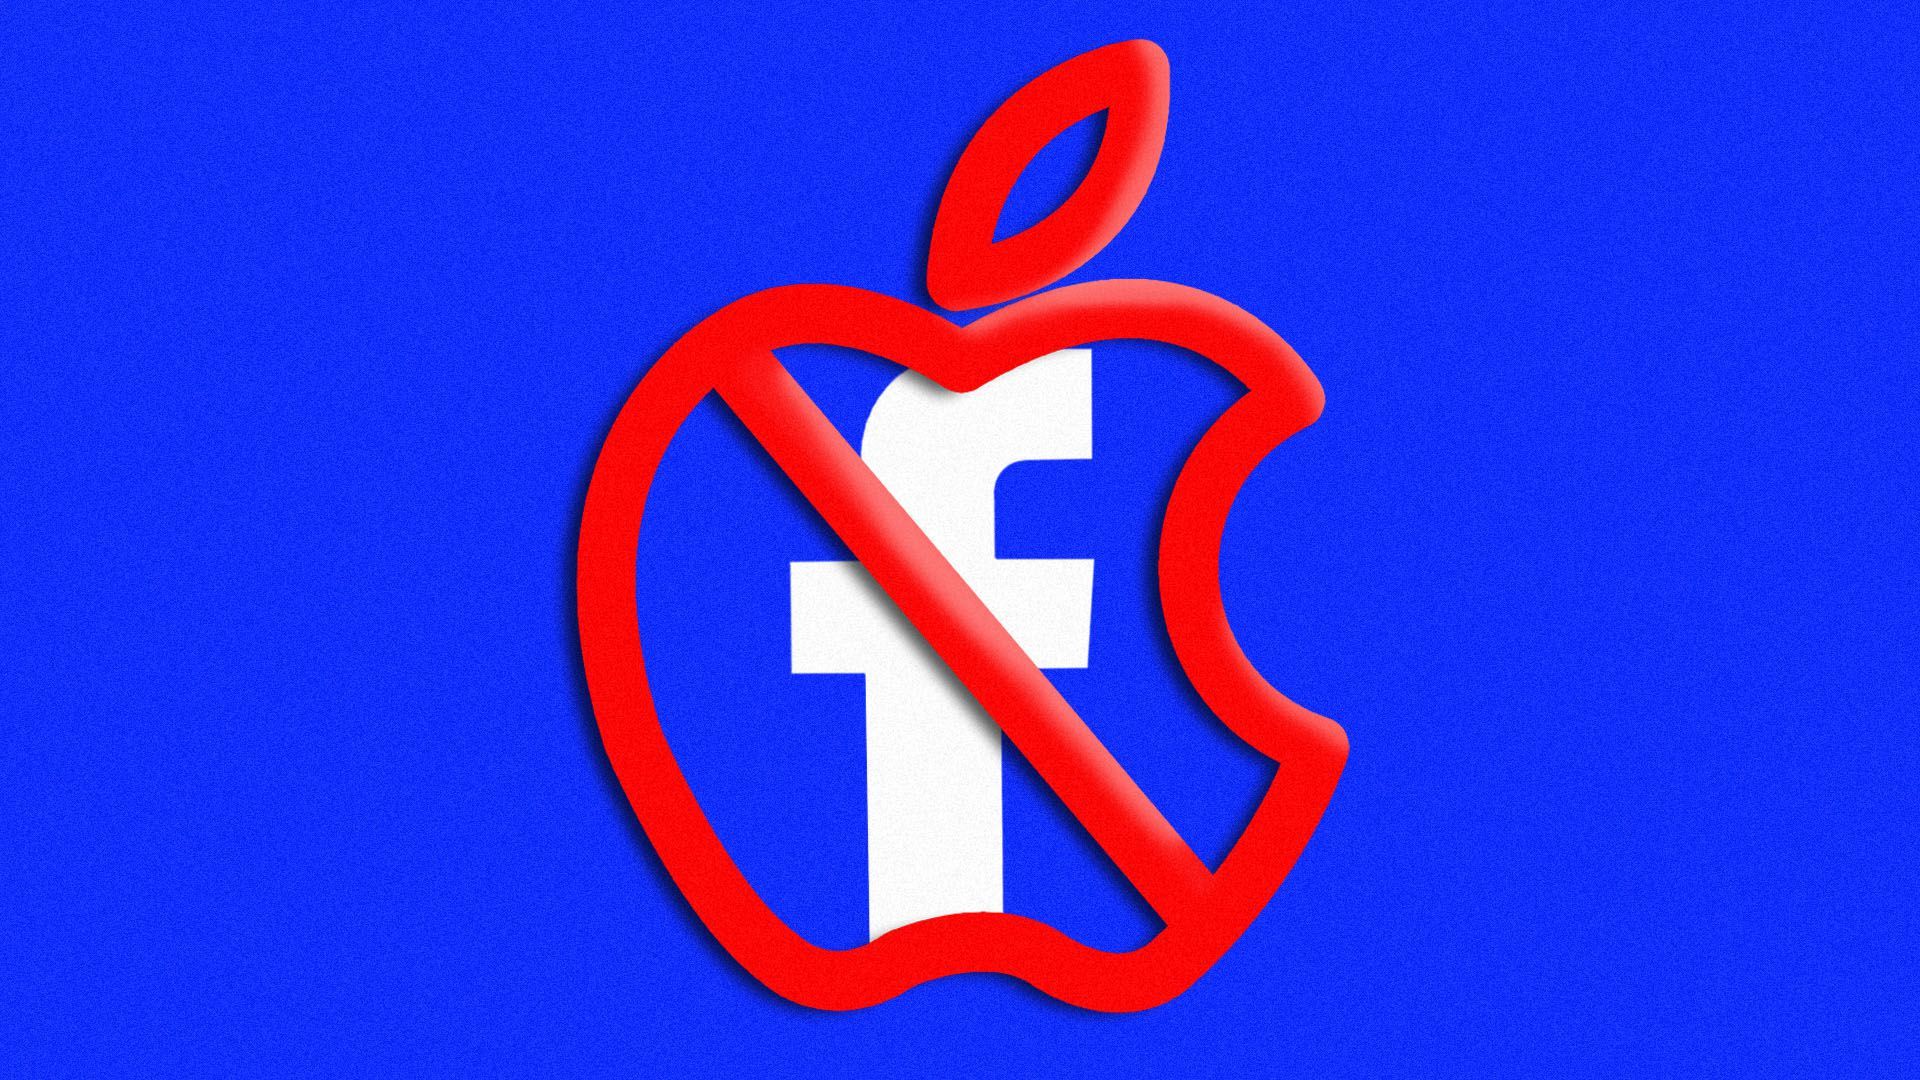 Illustration of the apple logo as a "no" sign over the facebook logo